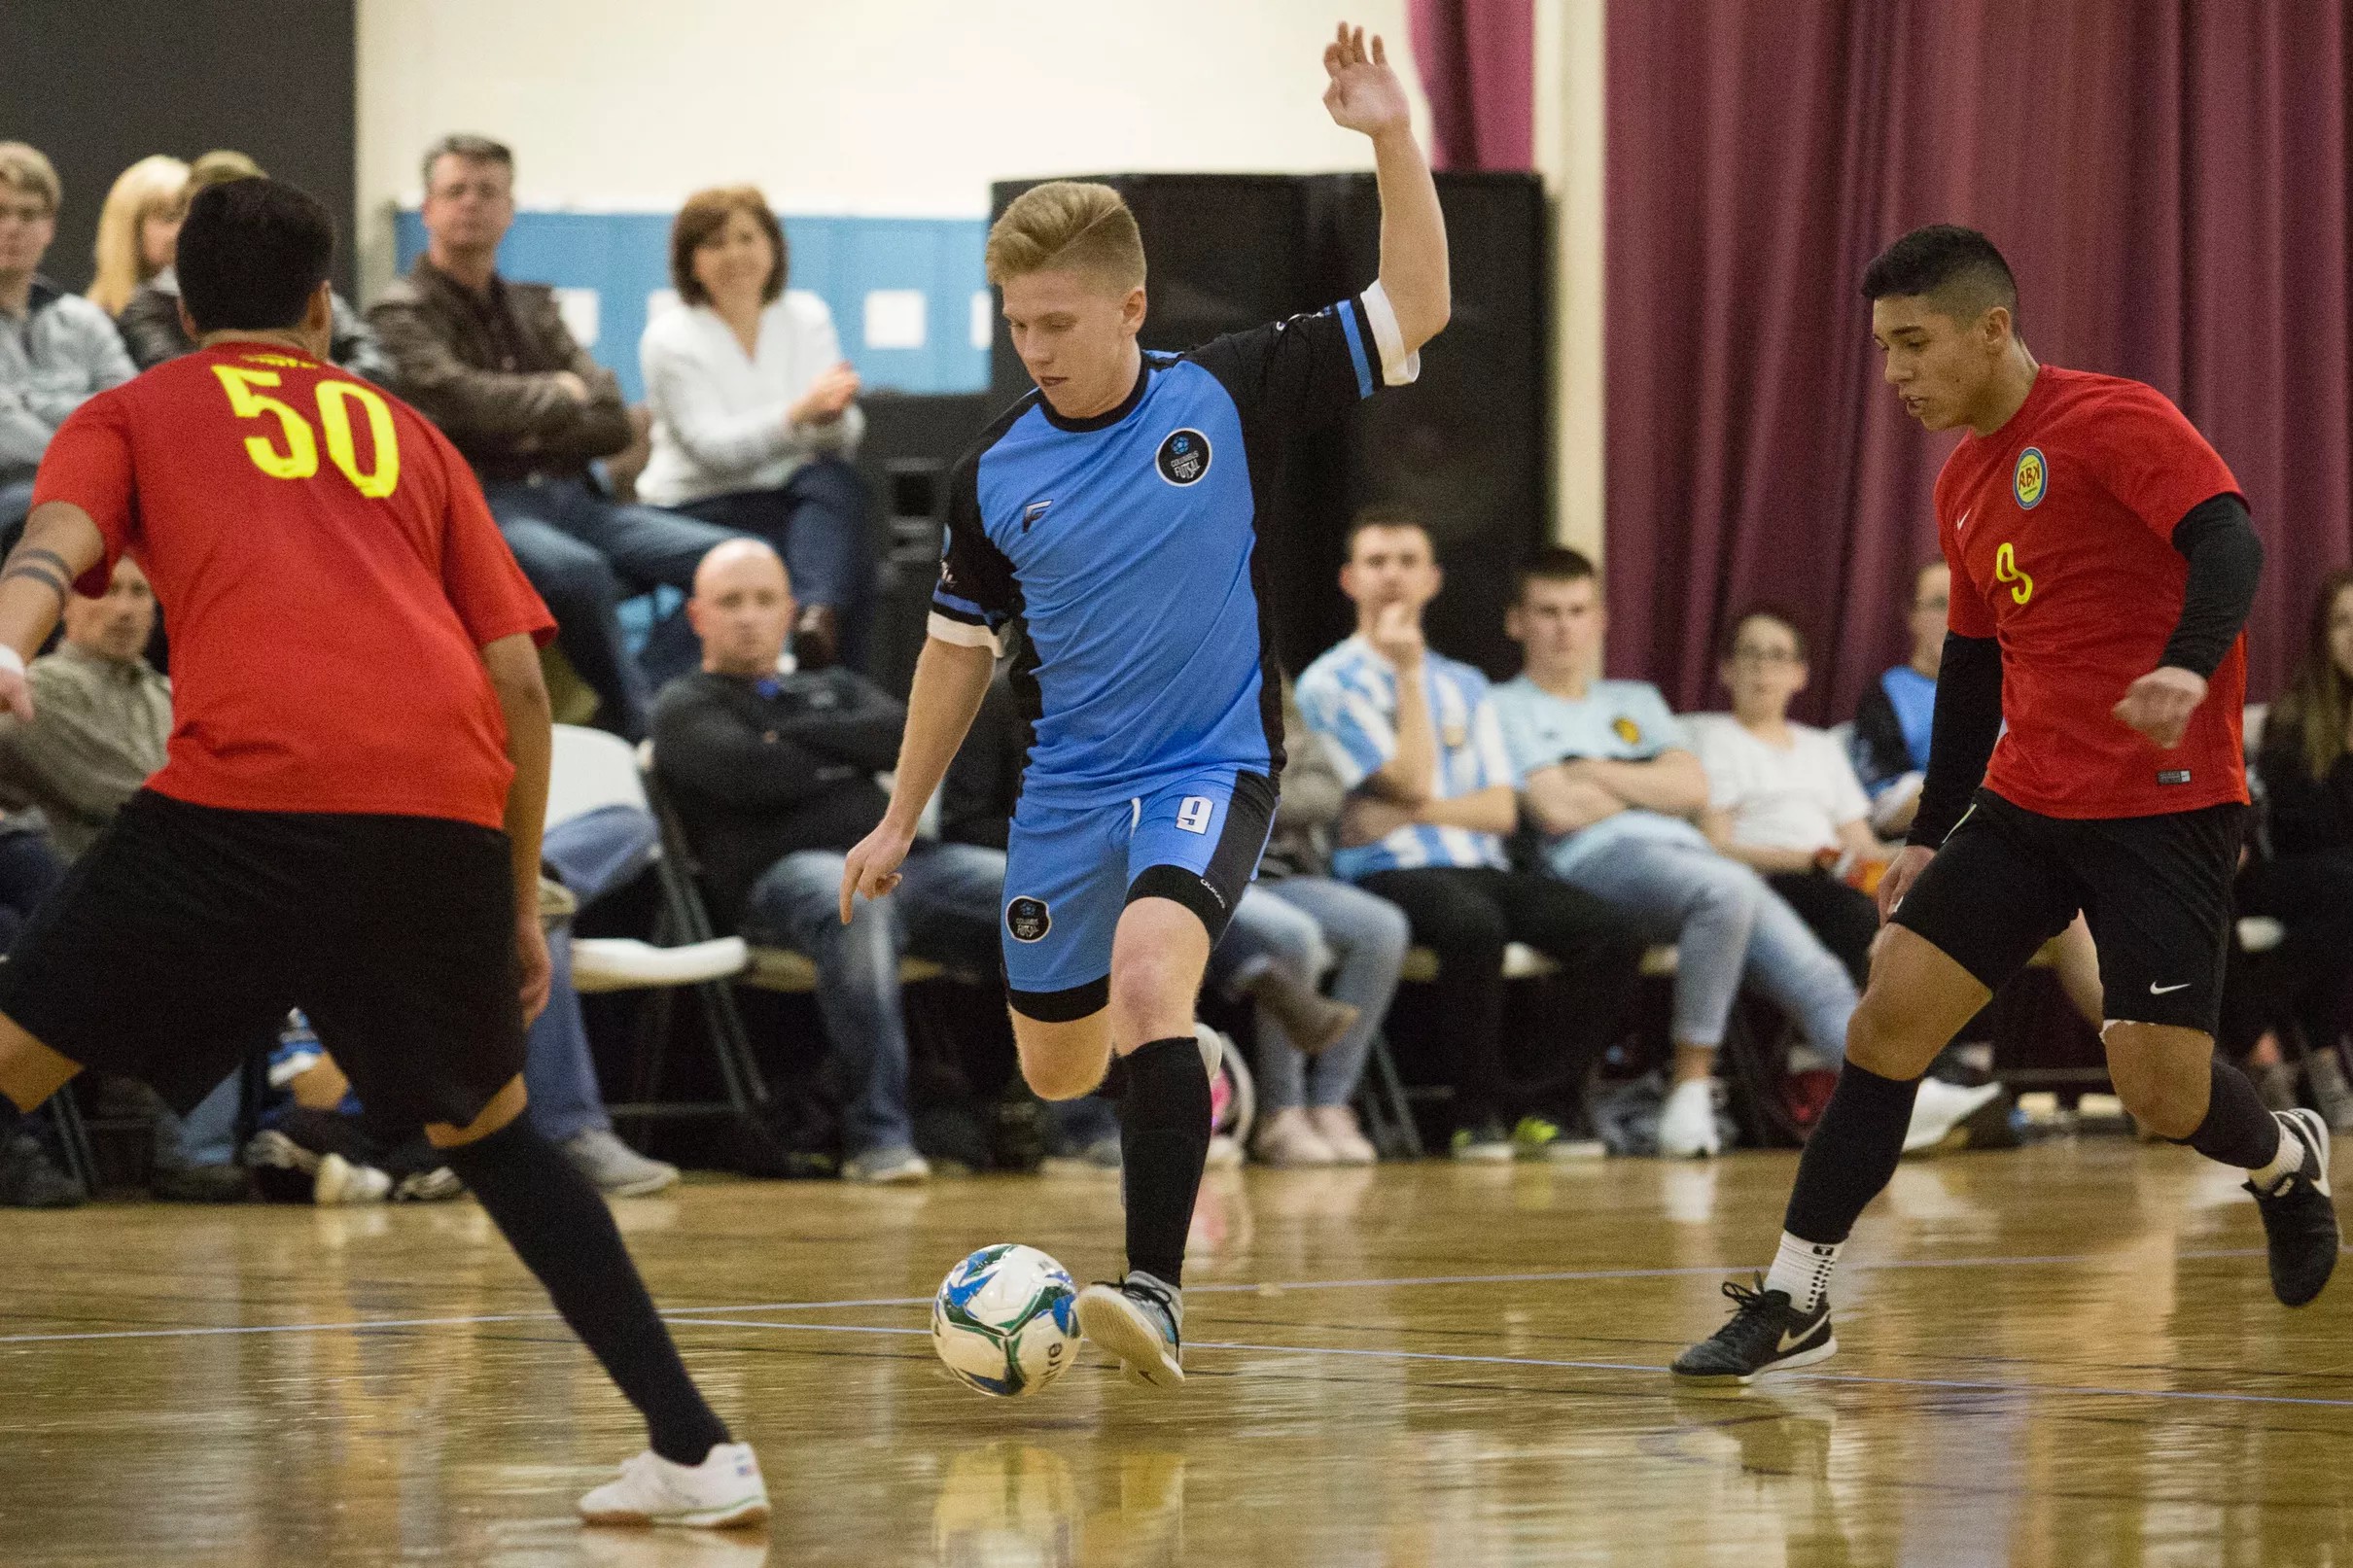 Columbus Futsal adds a bit of flair to “The Beautiful Game”